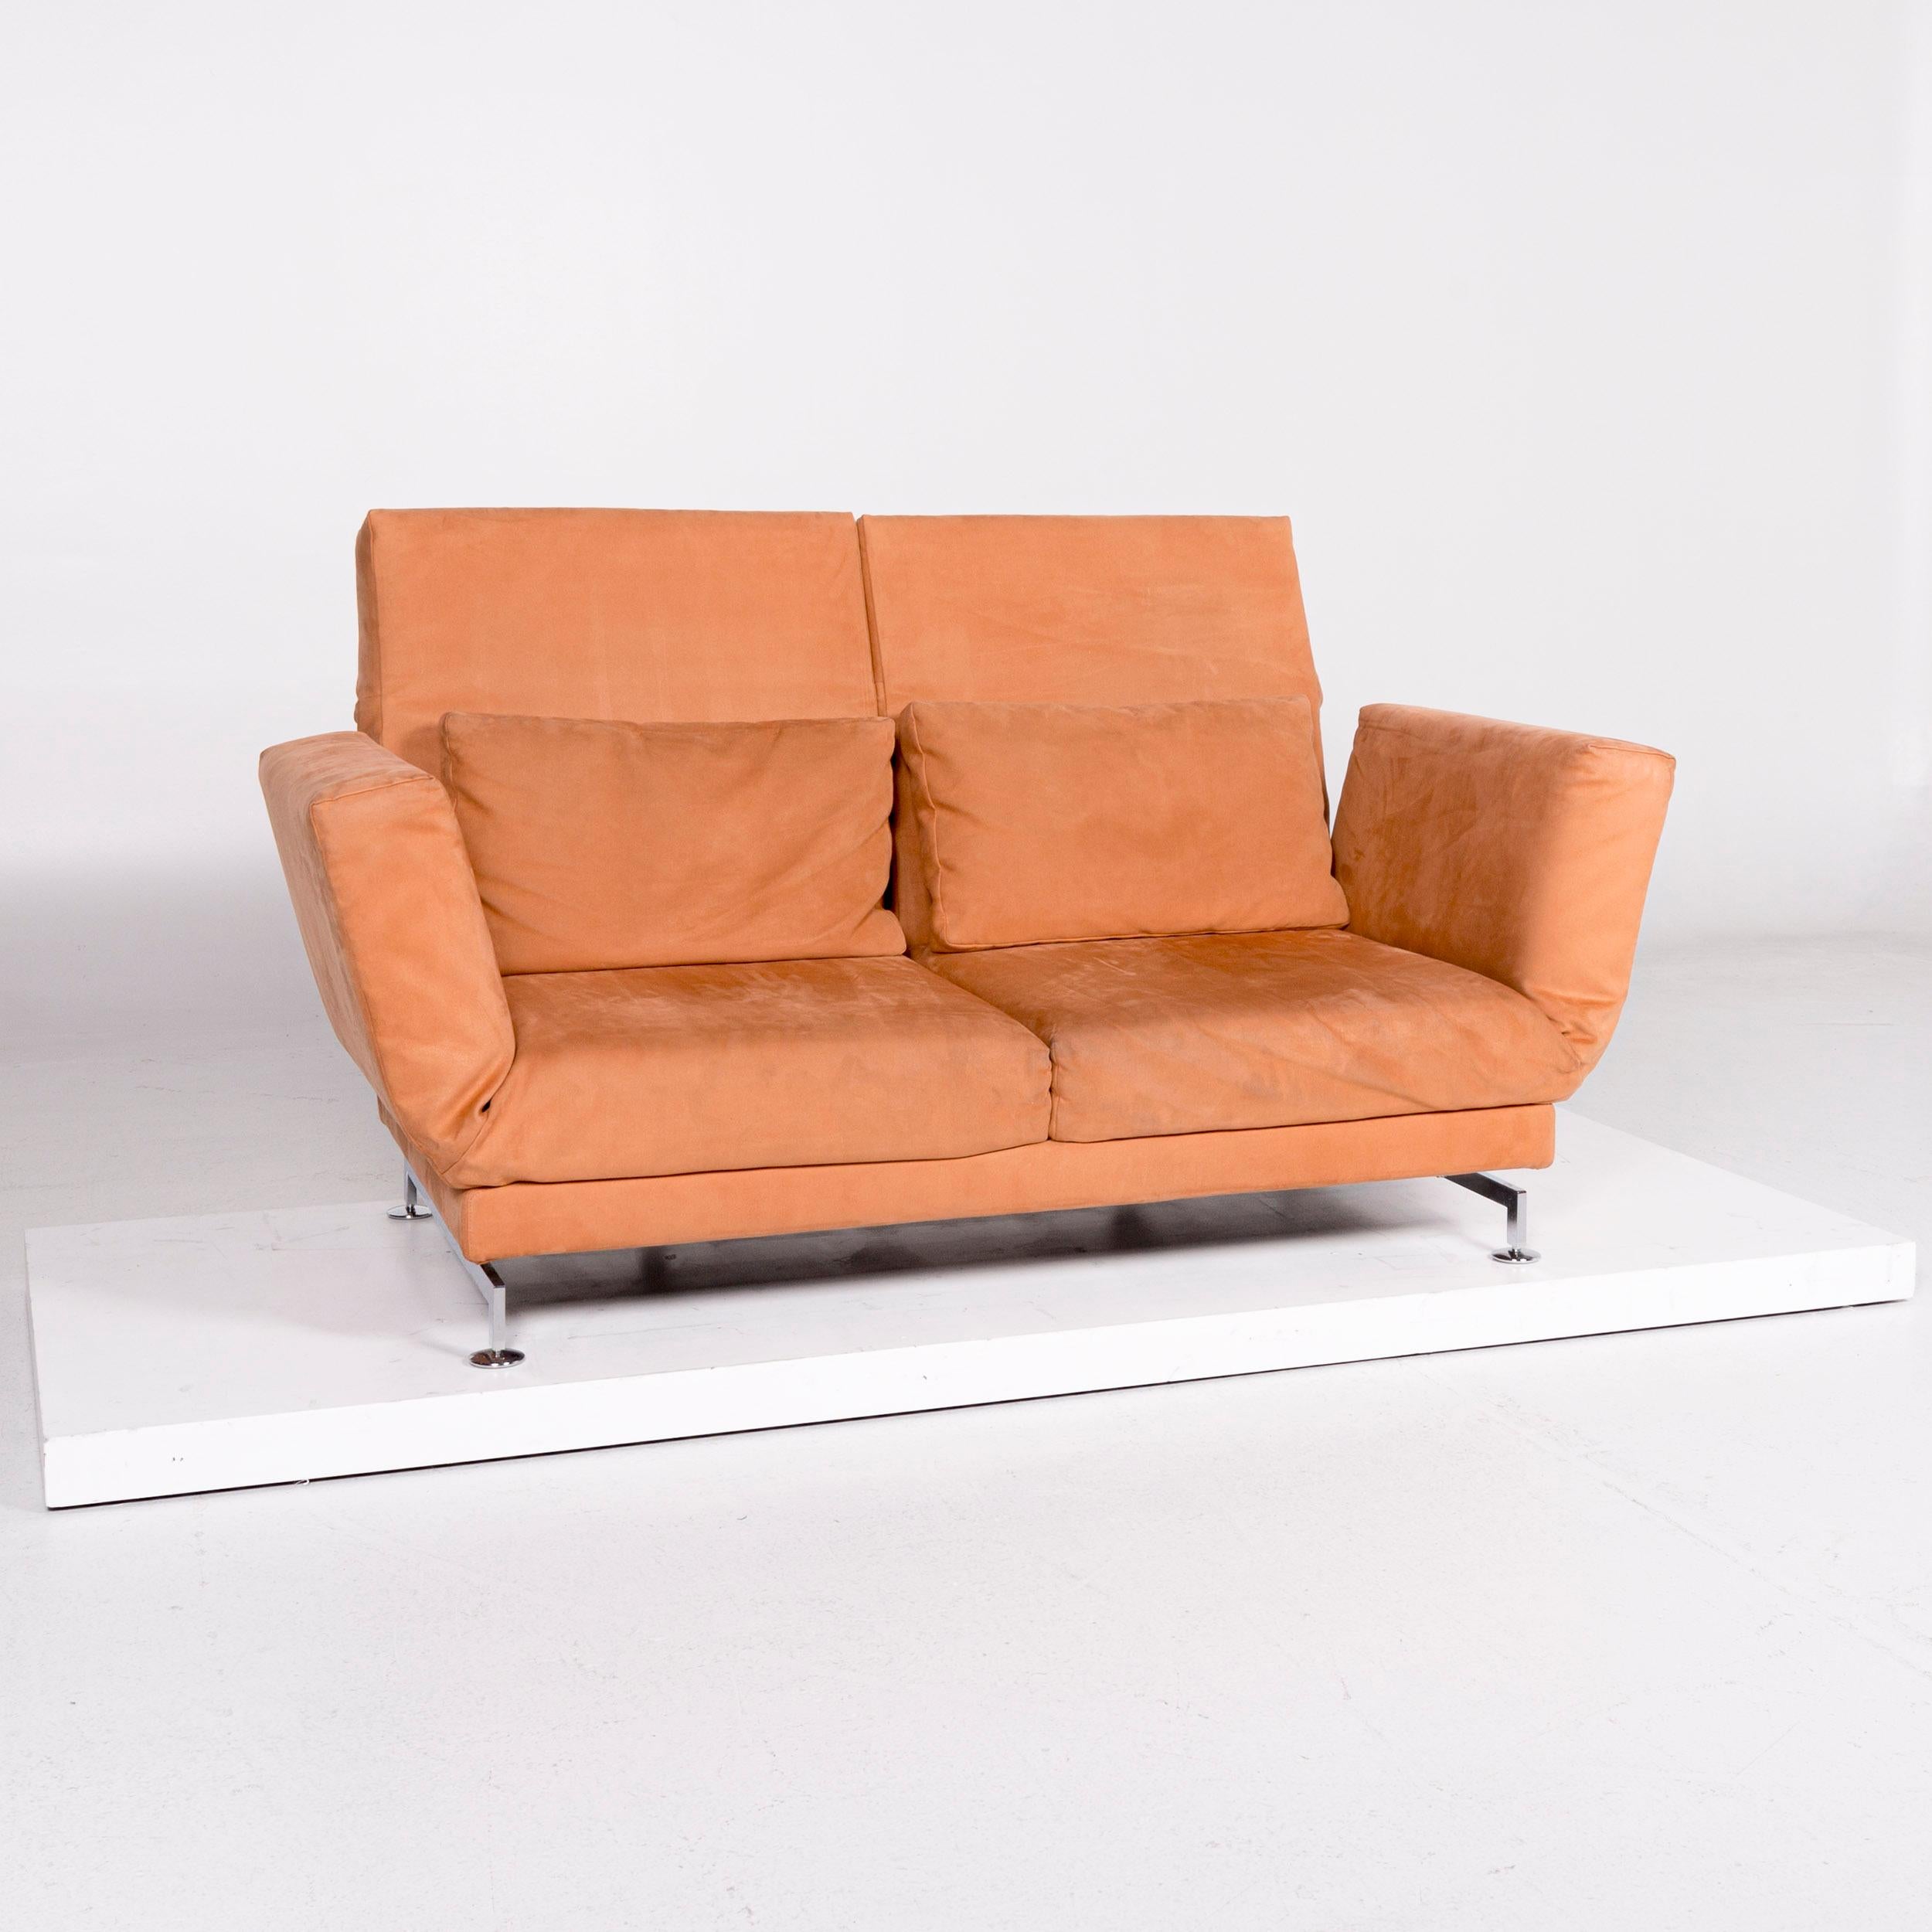 Brühl & Sippold Moule Fabric Sofa Orange Two-Seat Relax Function For Sale 5